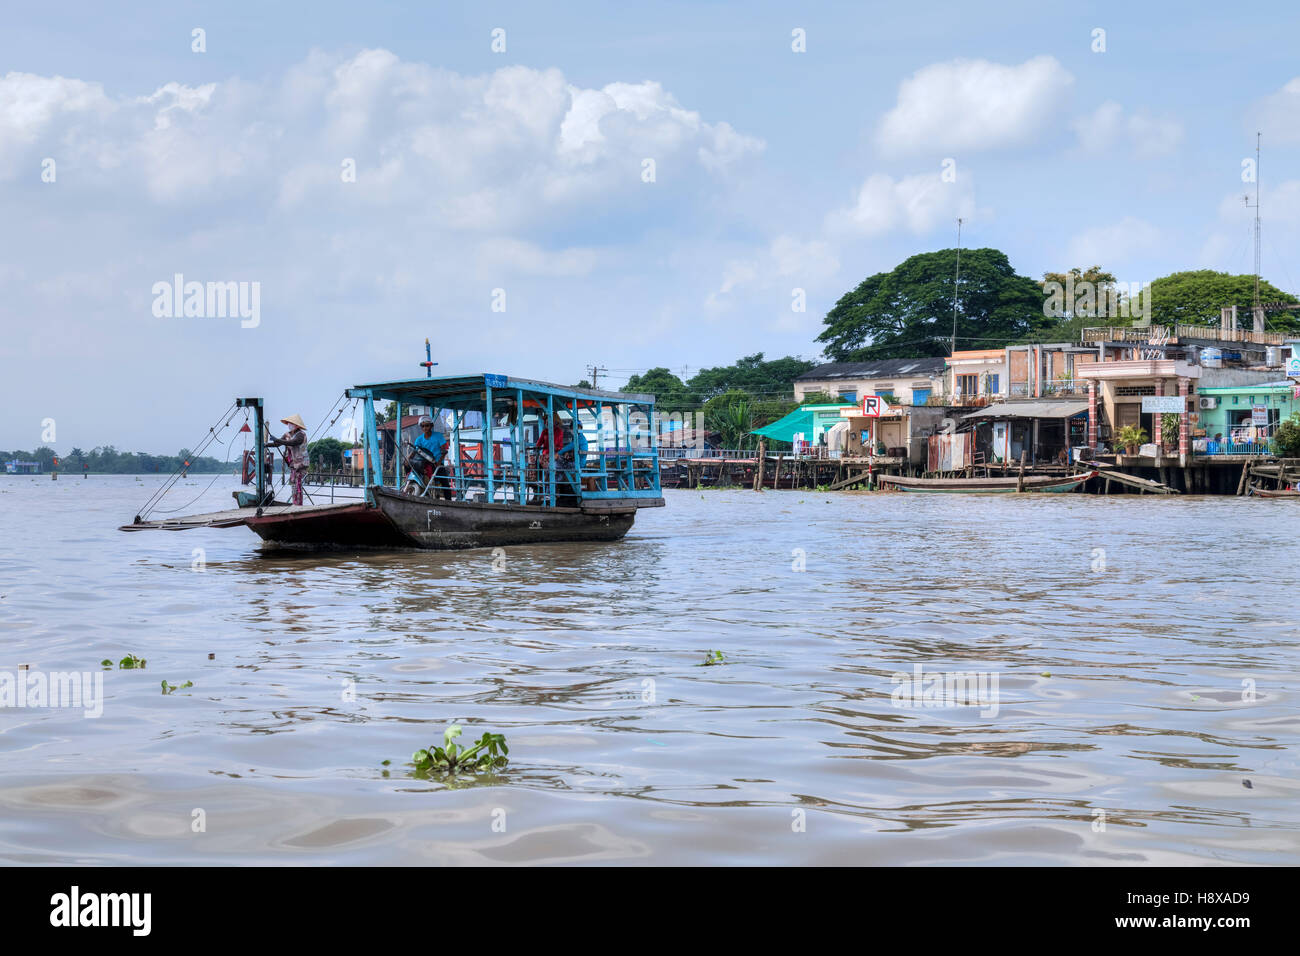 Ferry across the Mekong River in Cai Be, Mekong Delta, Vietnam, Asia Stock Photo